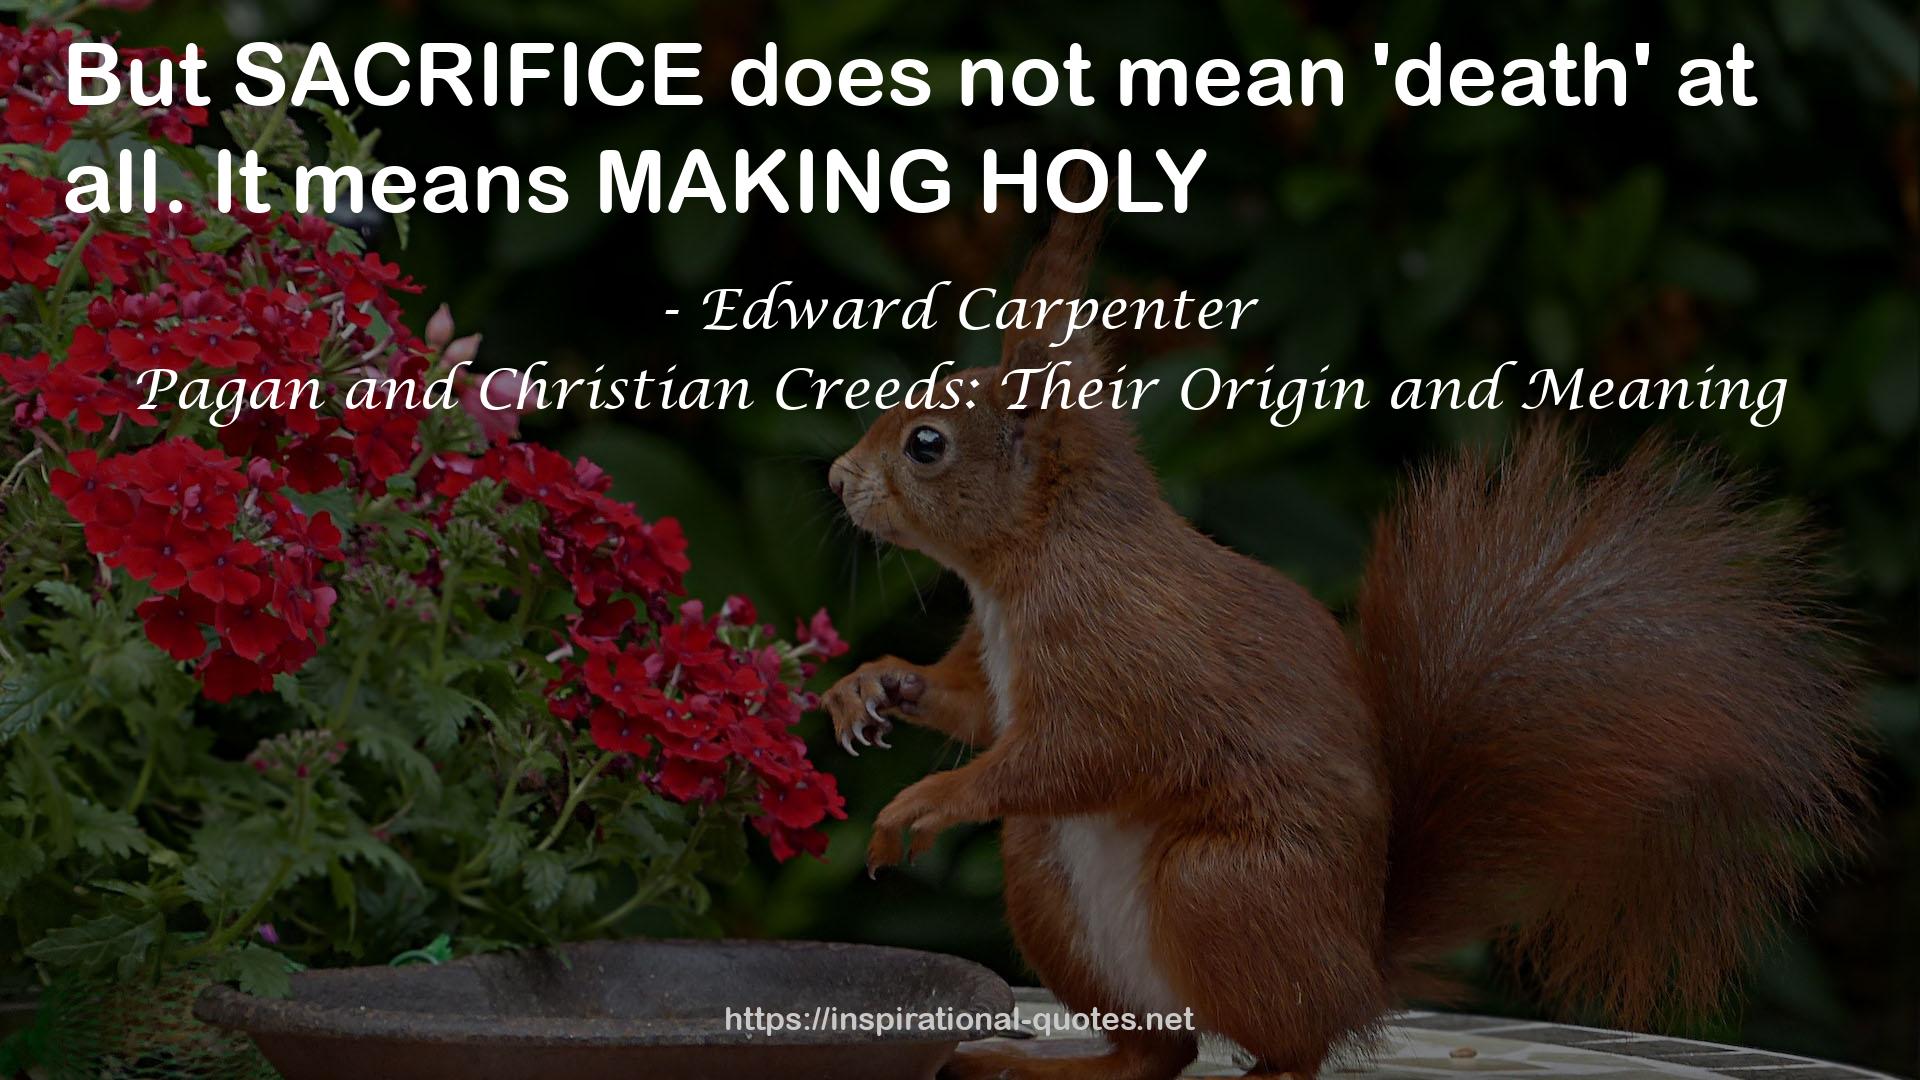 Pagan and Christian Creeds: Their Origin and Meaning QUOTES